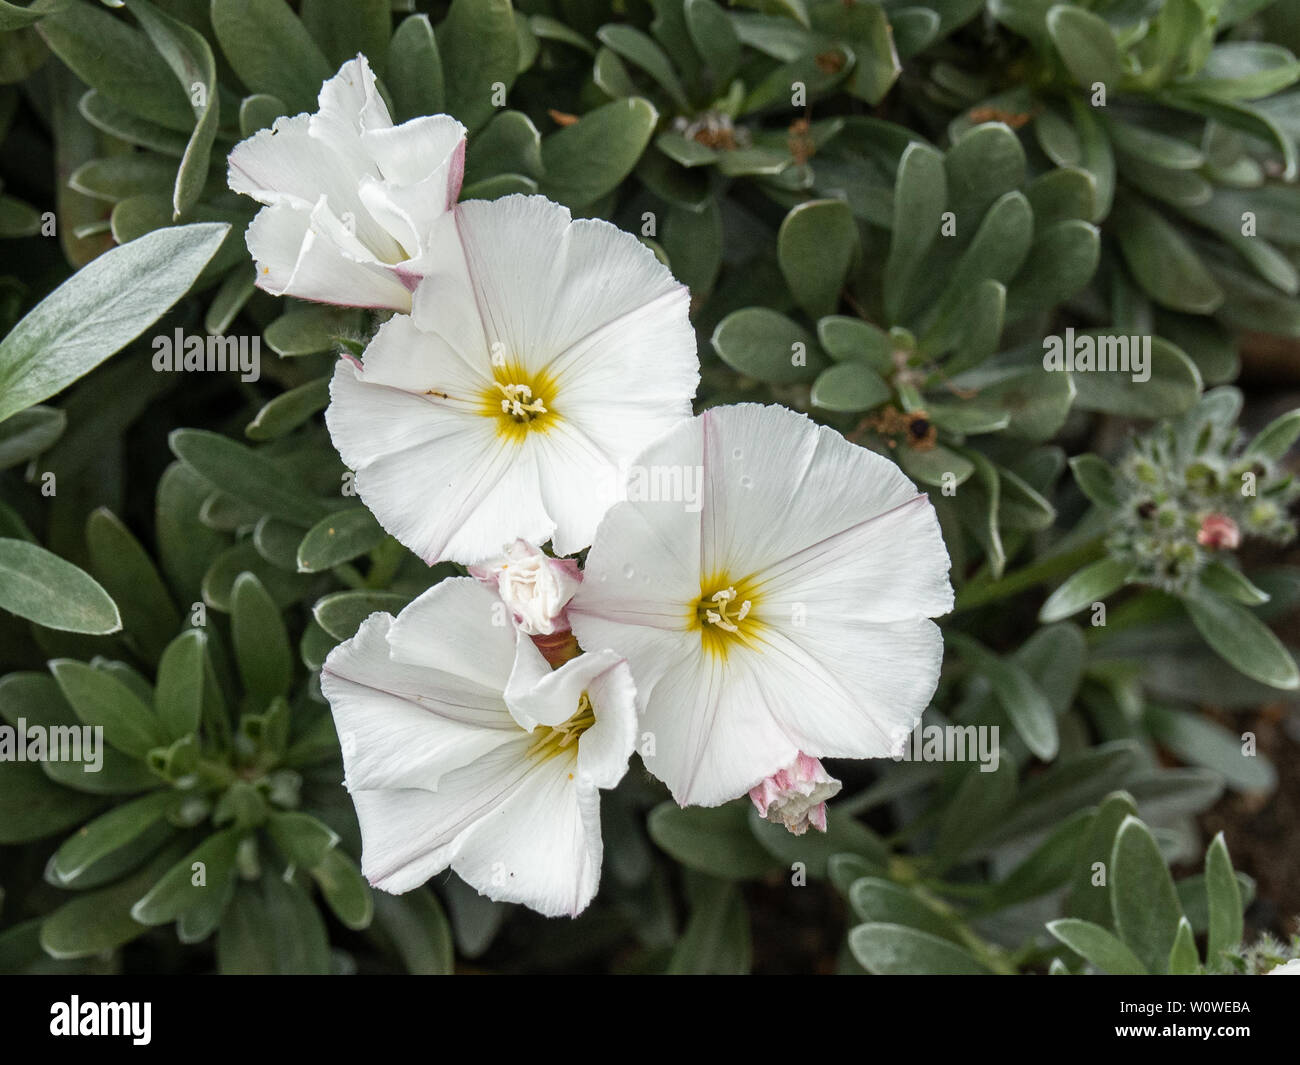 A group of white flowers of Convolvulus cneorum against a background of silver grey foliage Stock Photo